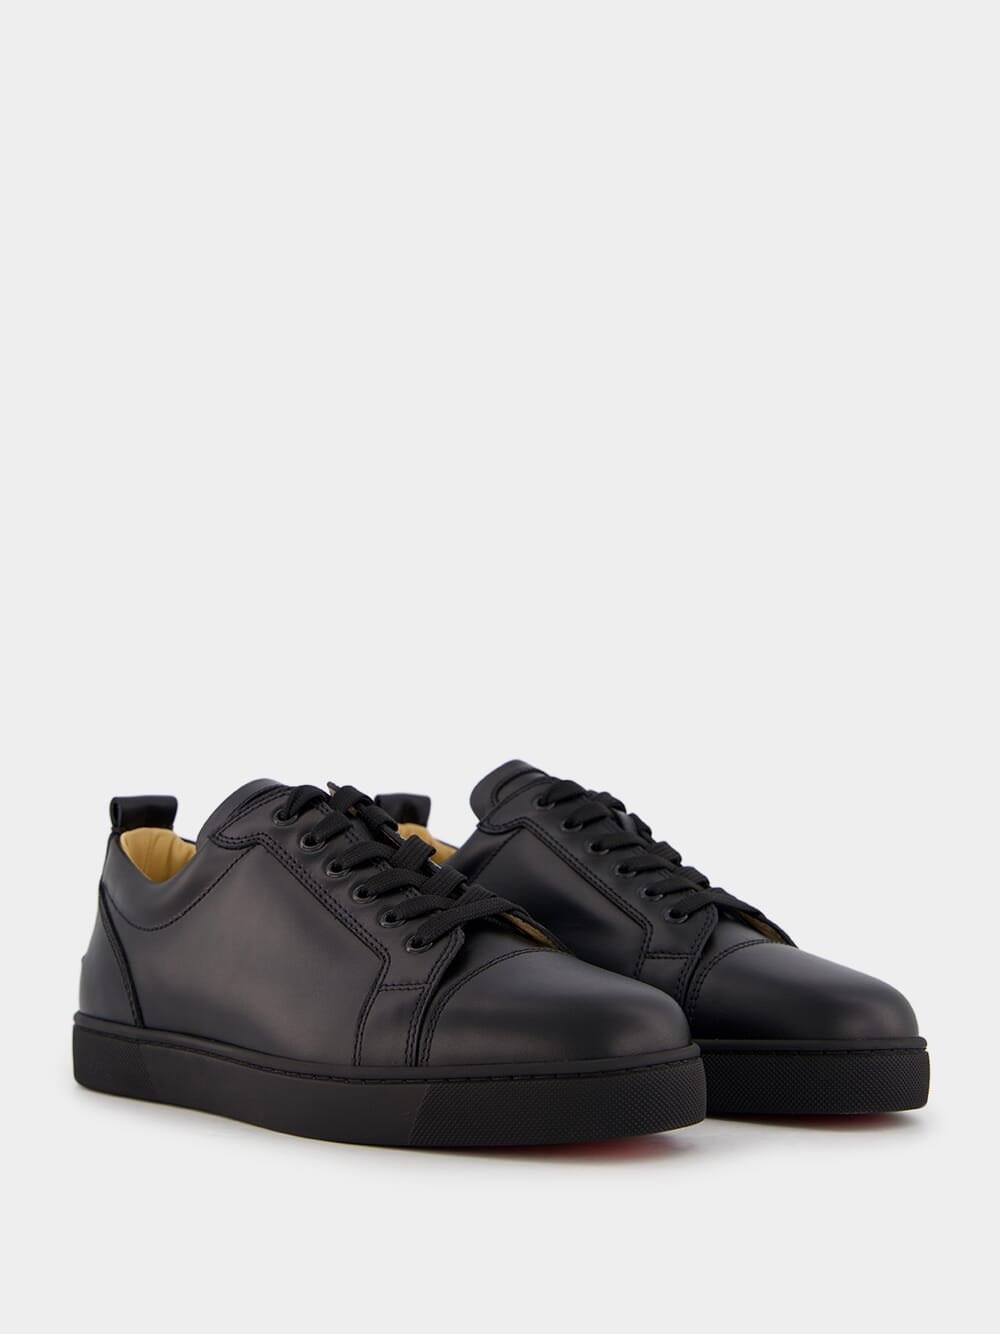 Christian LouboutinLouis Junior Low-Top Leather Sneakers at Fashion Clinic